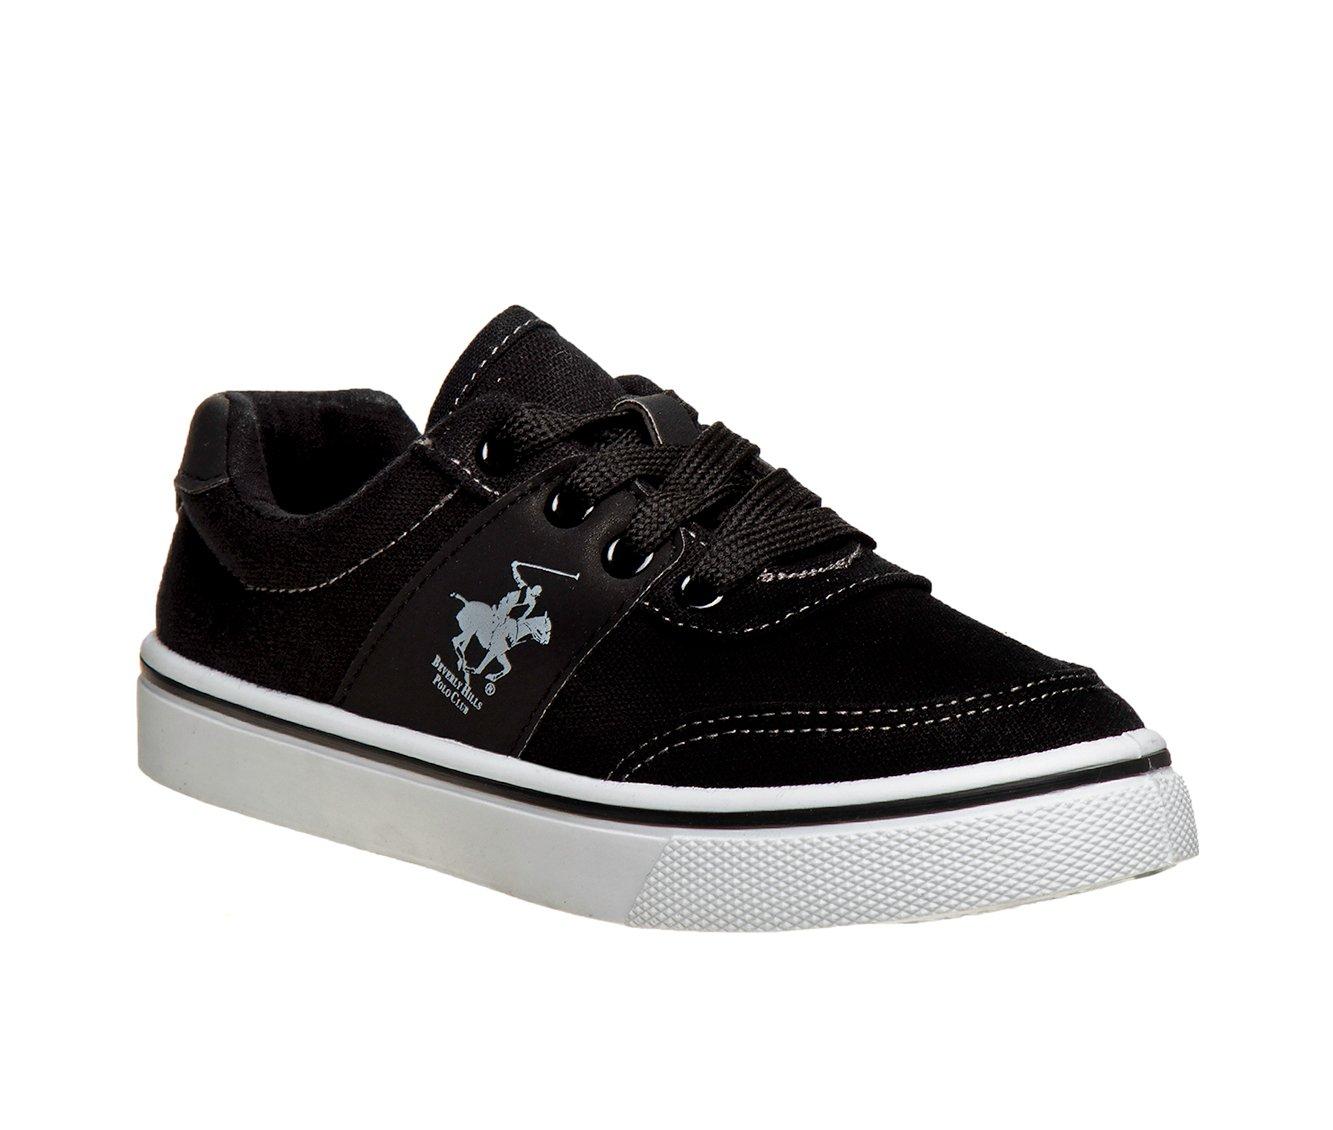 Boys' Beverly Hills Polo Club Little Kid & Big Lace-Up Casual Sneakers